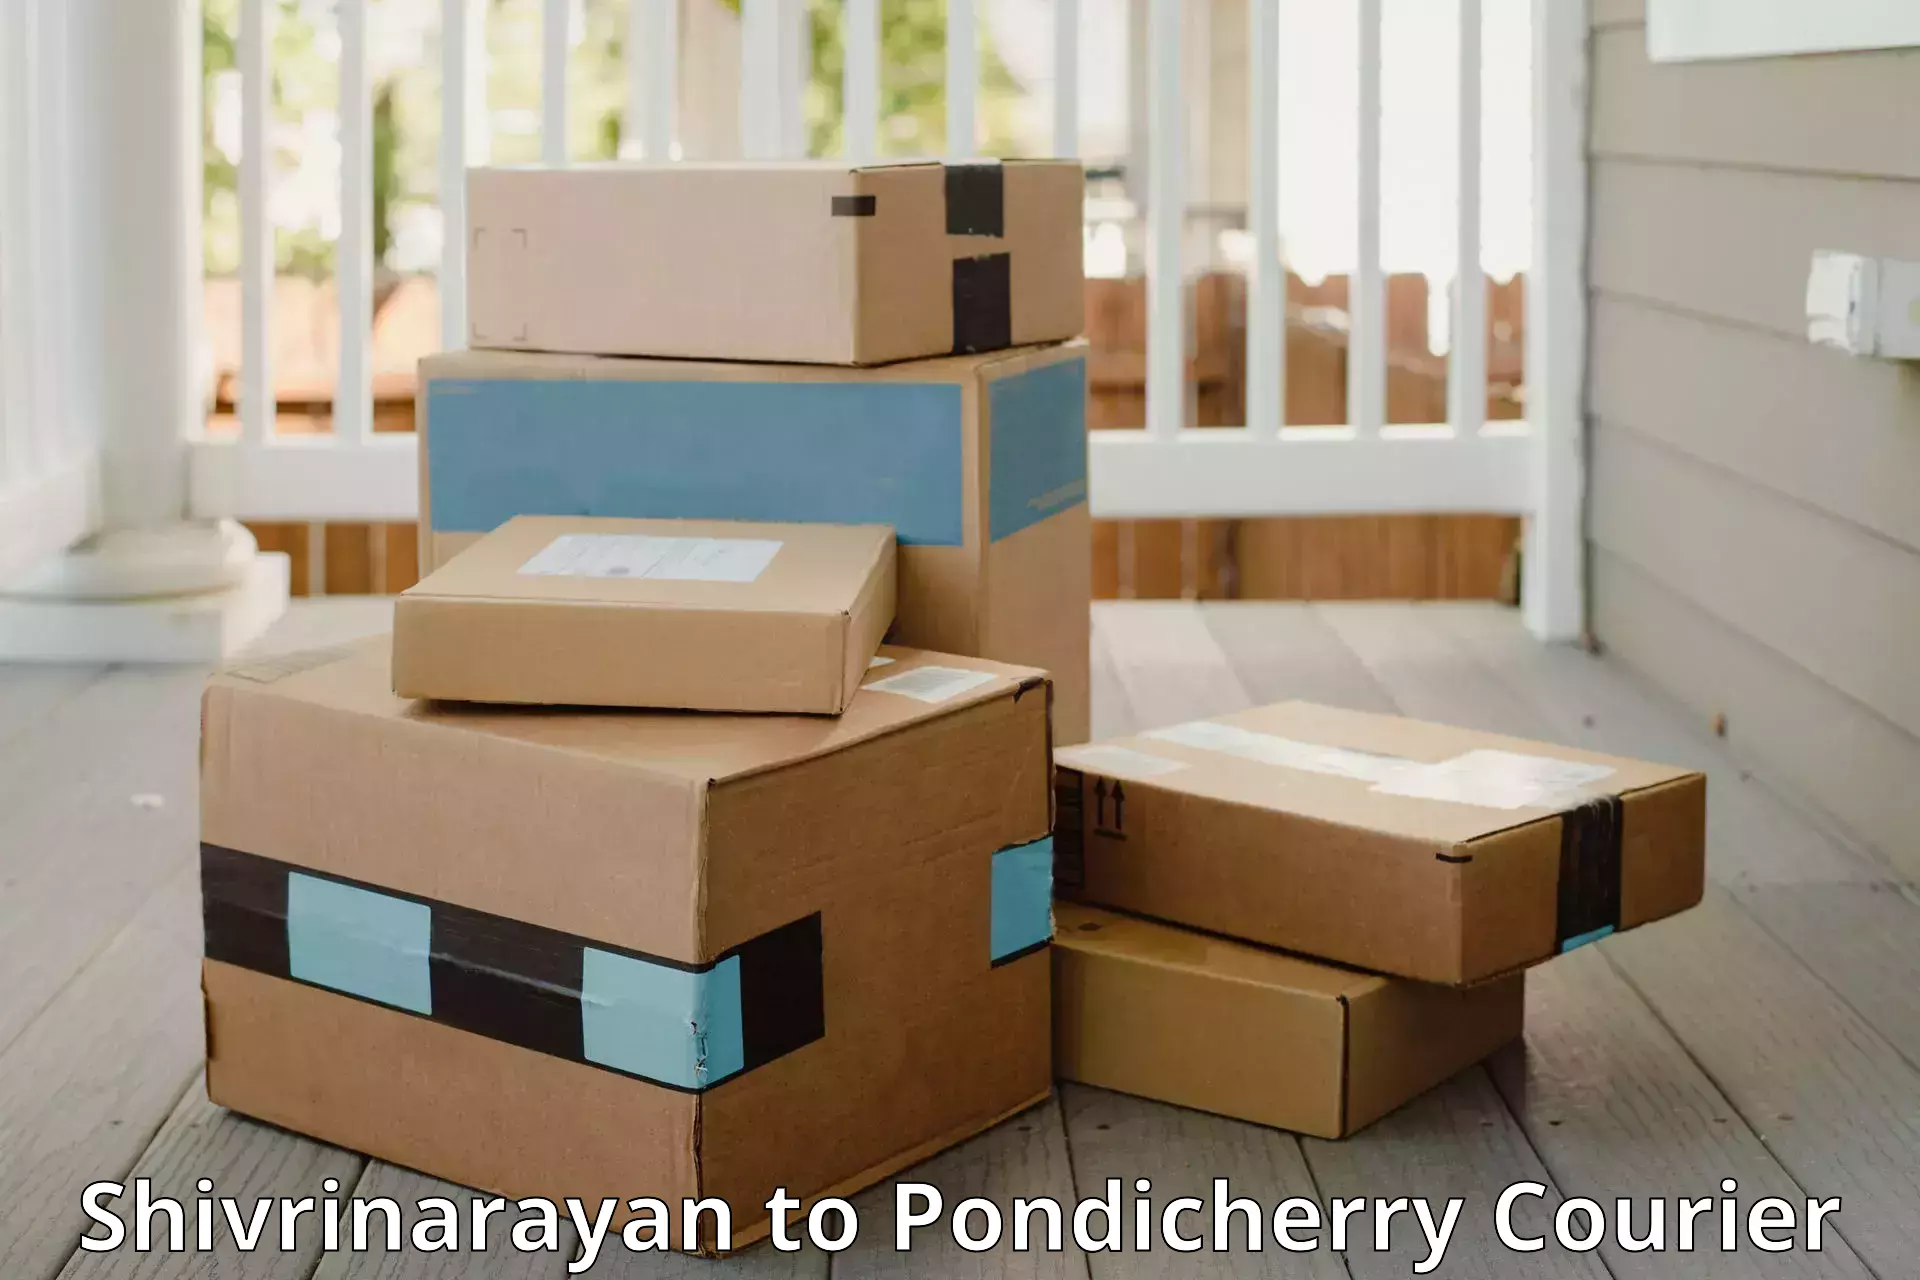 Airport luggage delivery Shivrinarayan to Pondicherry